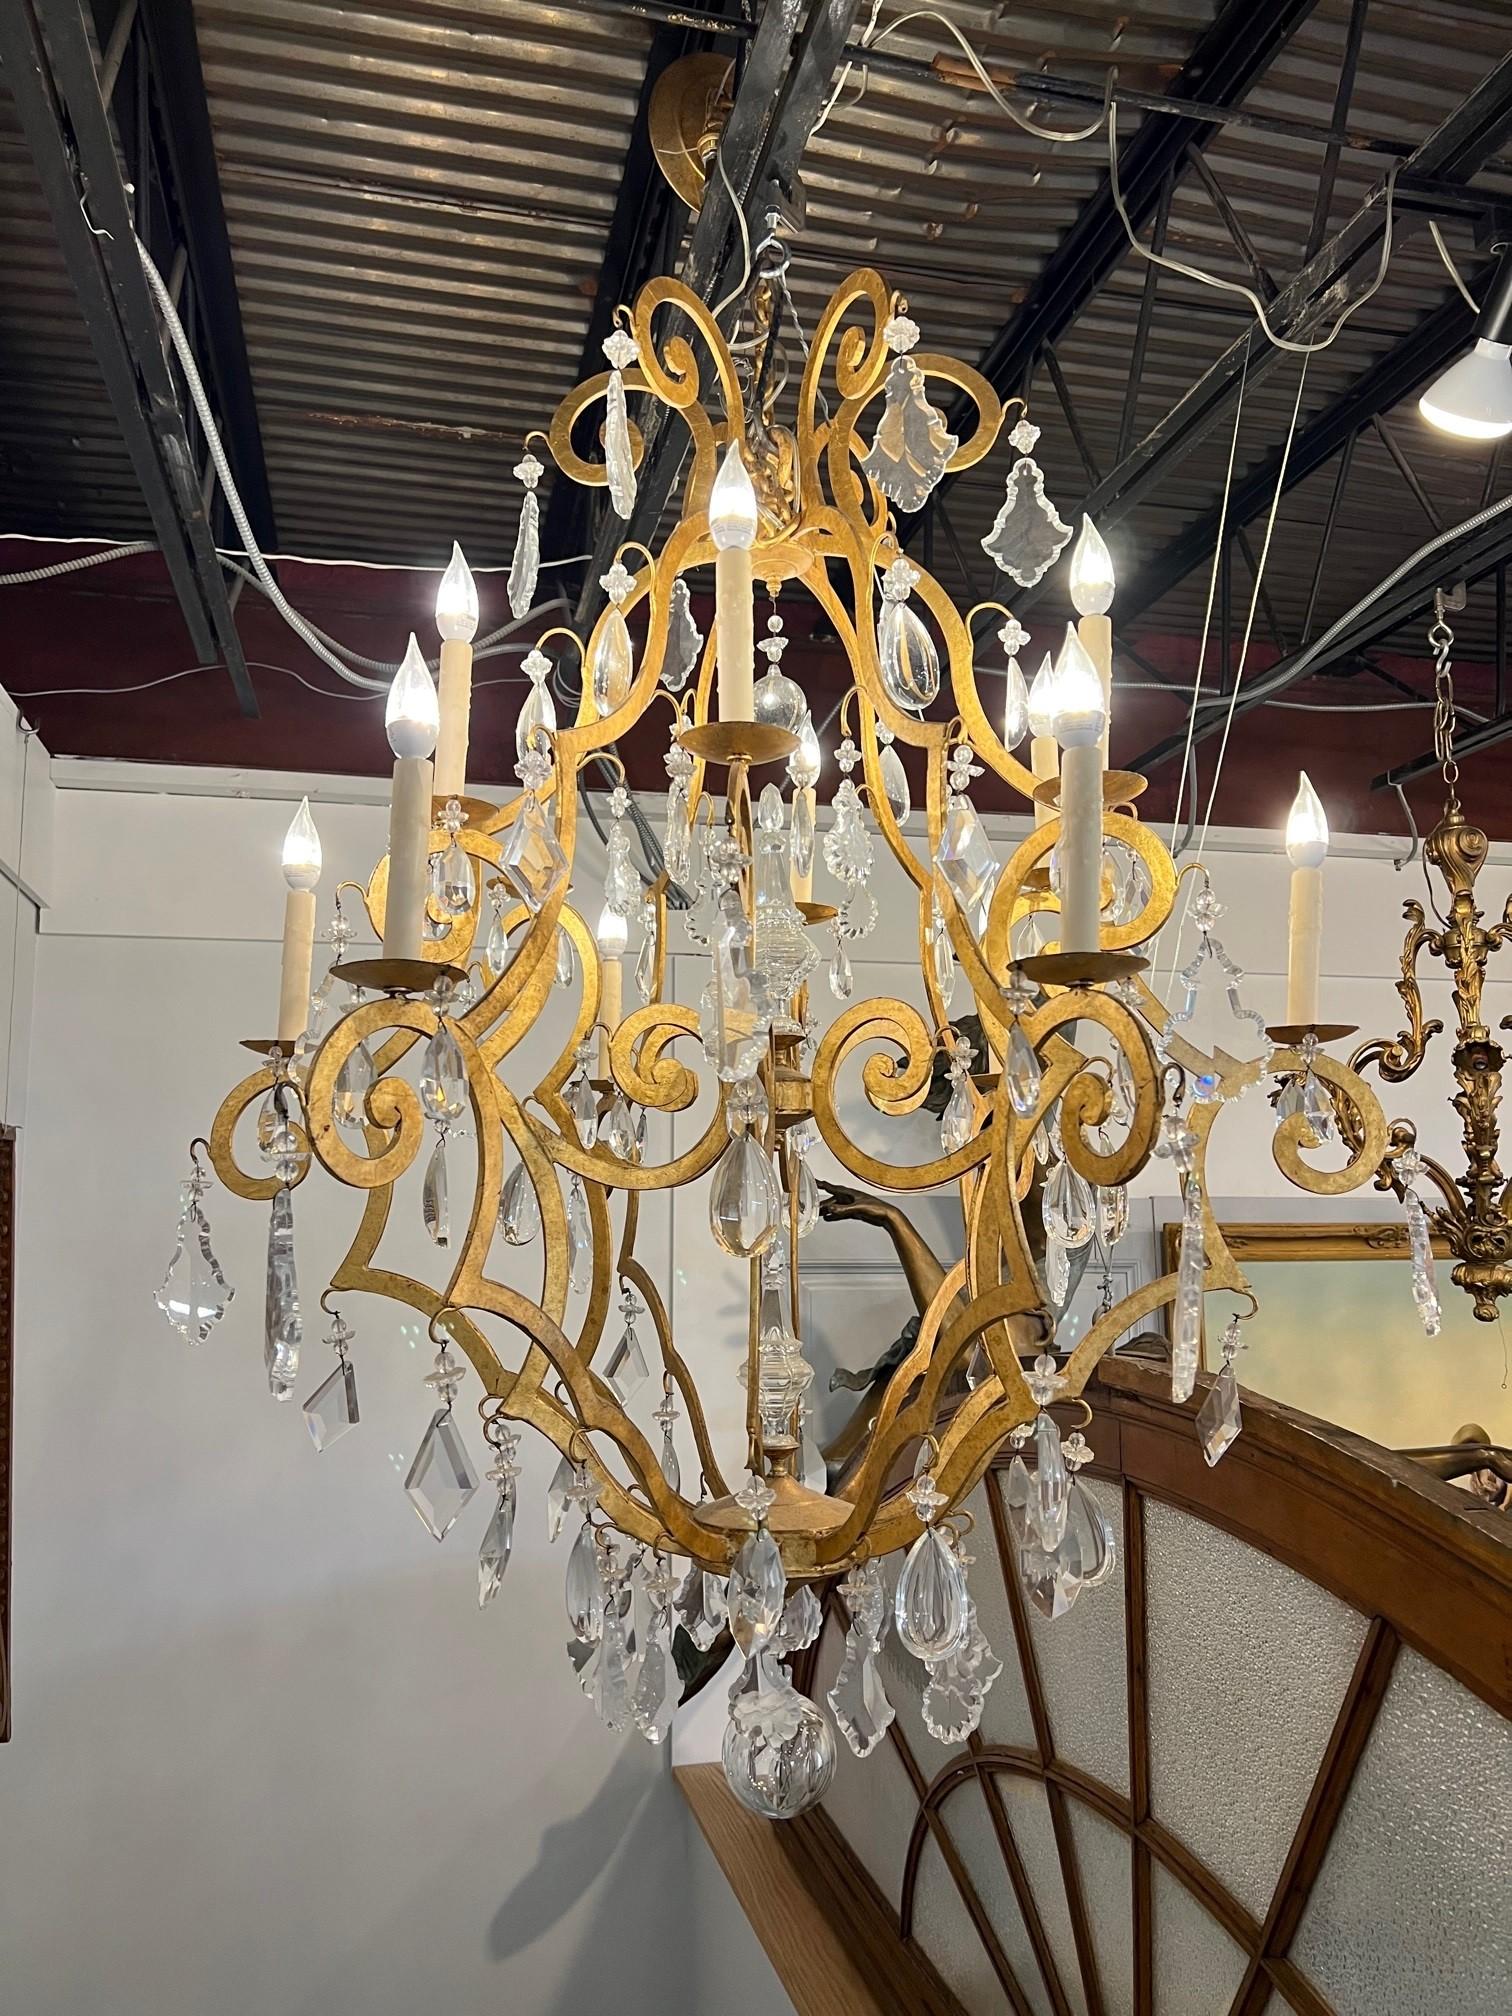 Large iron and crystal chandelier, gold finish and 12 lights. It has six different size and shape crystals hang from the chandelier which gives it a good look. The lights are candelabra size and all are in working condition. Salvaged from a home in